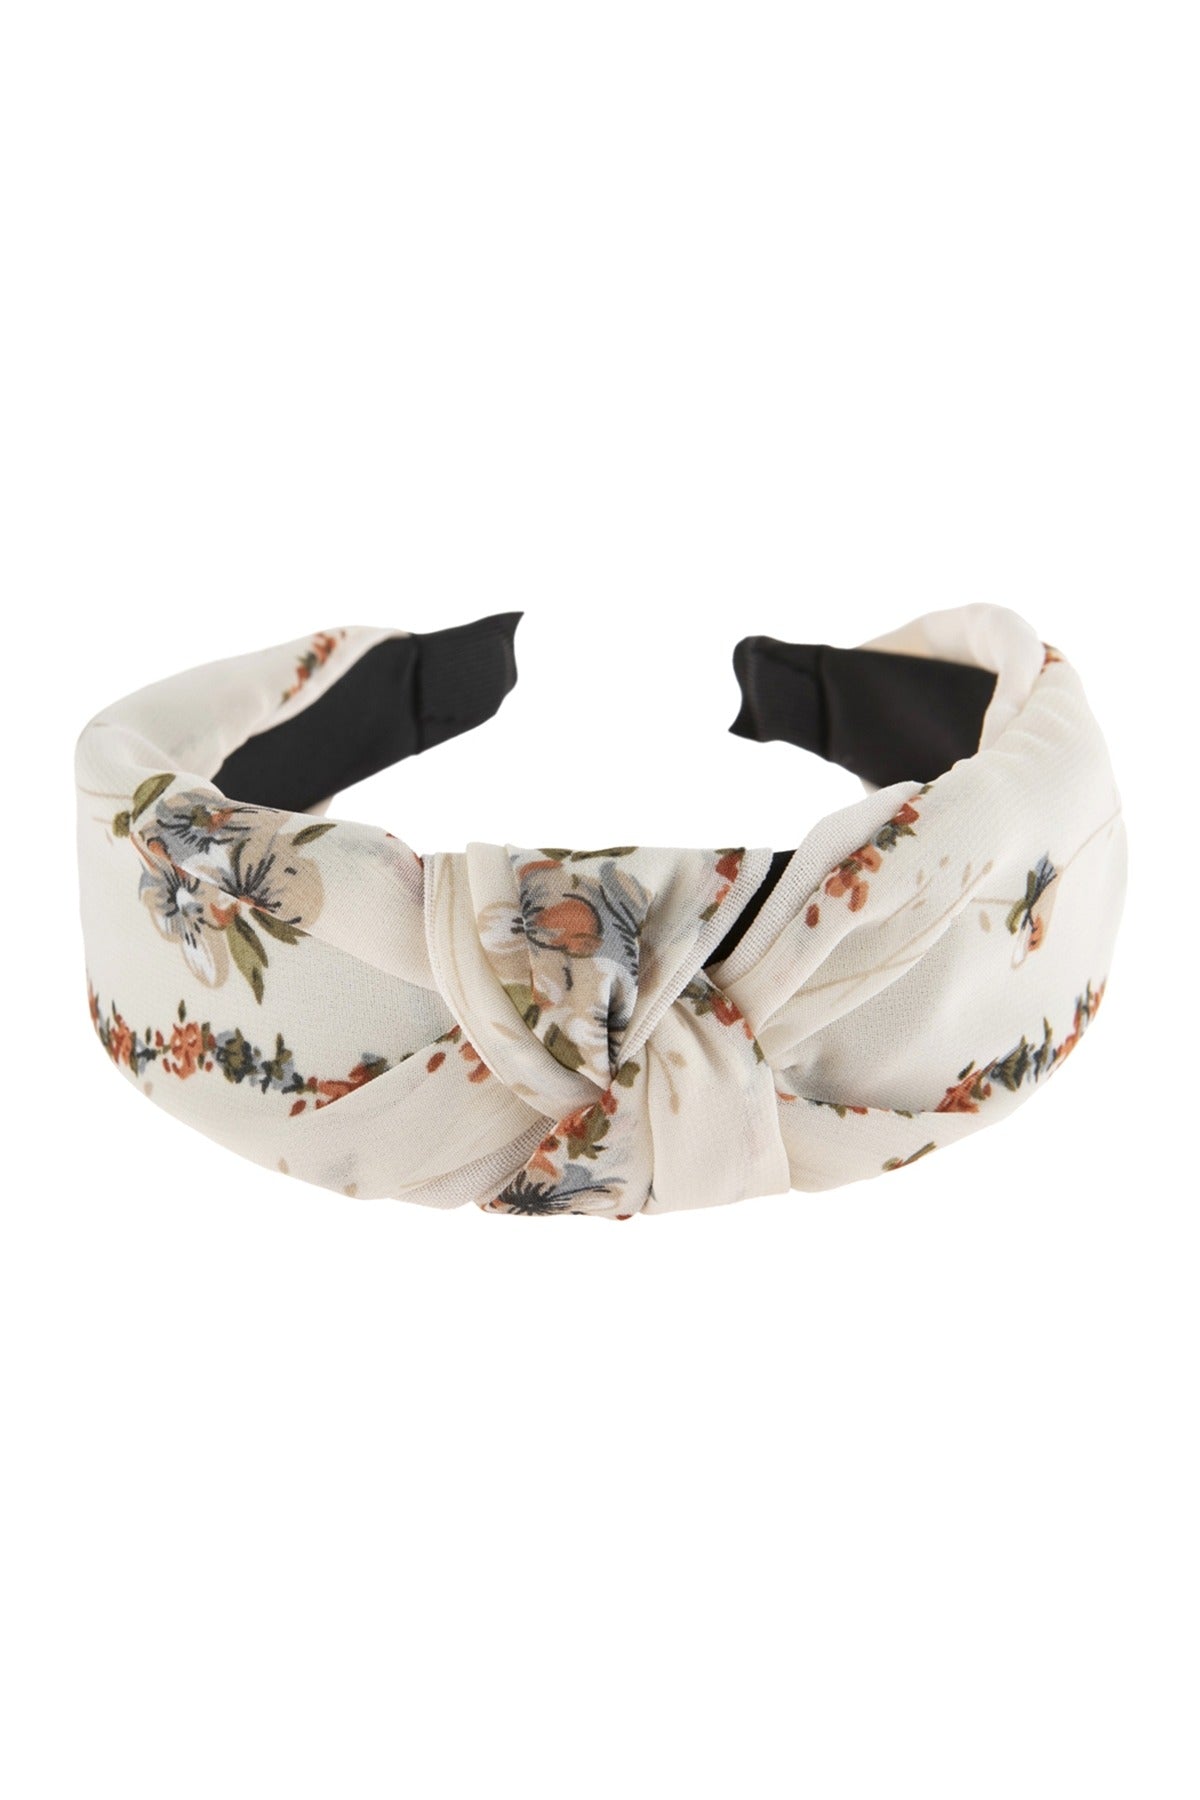 Floral Printed Knotted Fabric Headbands